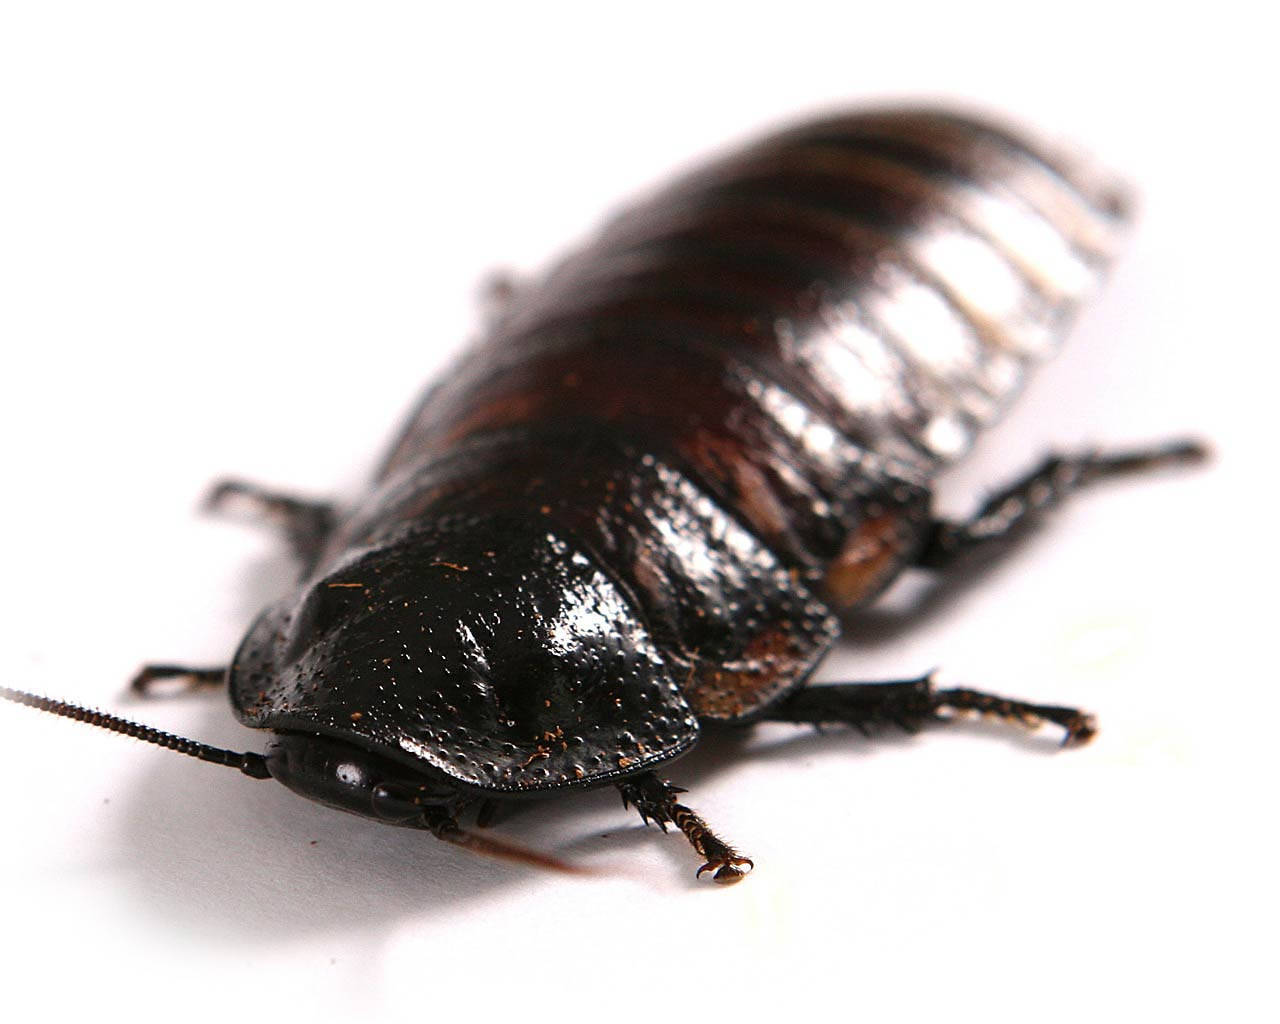 Caption: Close-up View Of A Big Black Oriental Cockroach Background